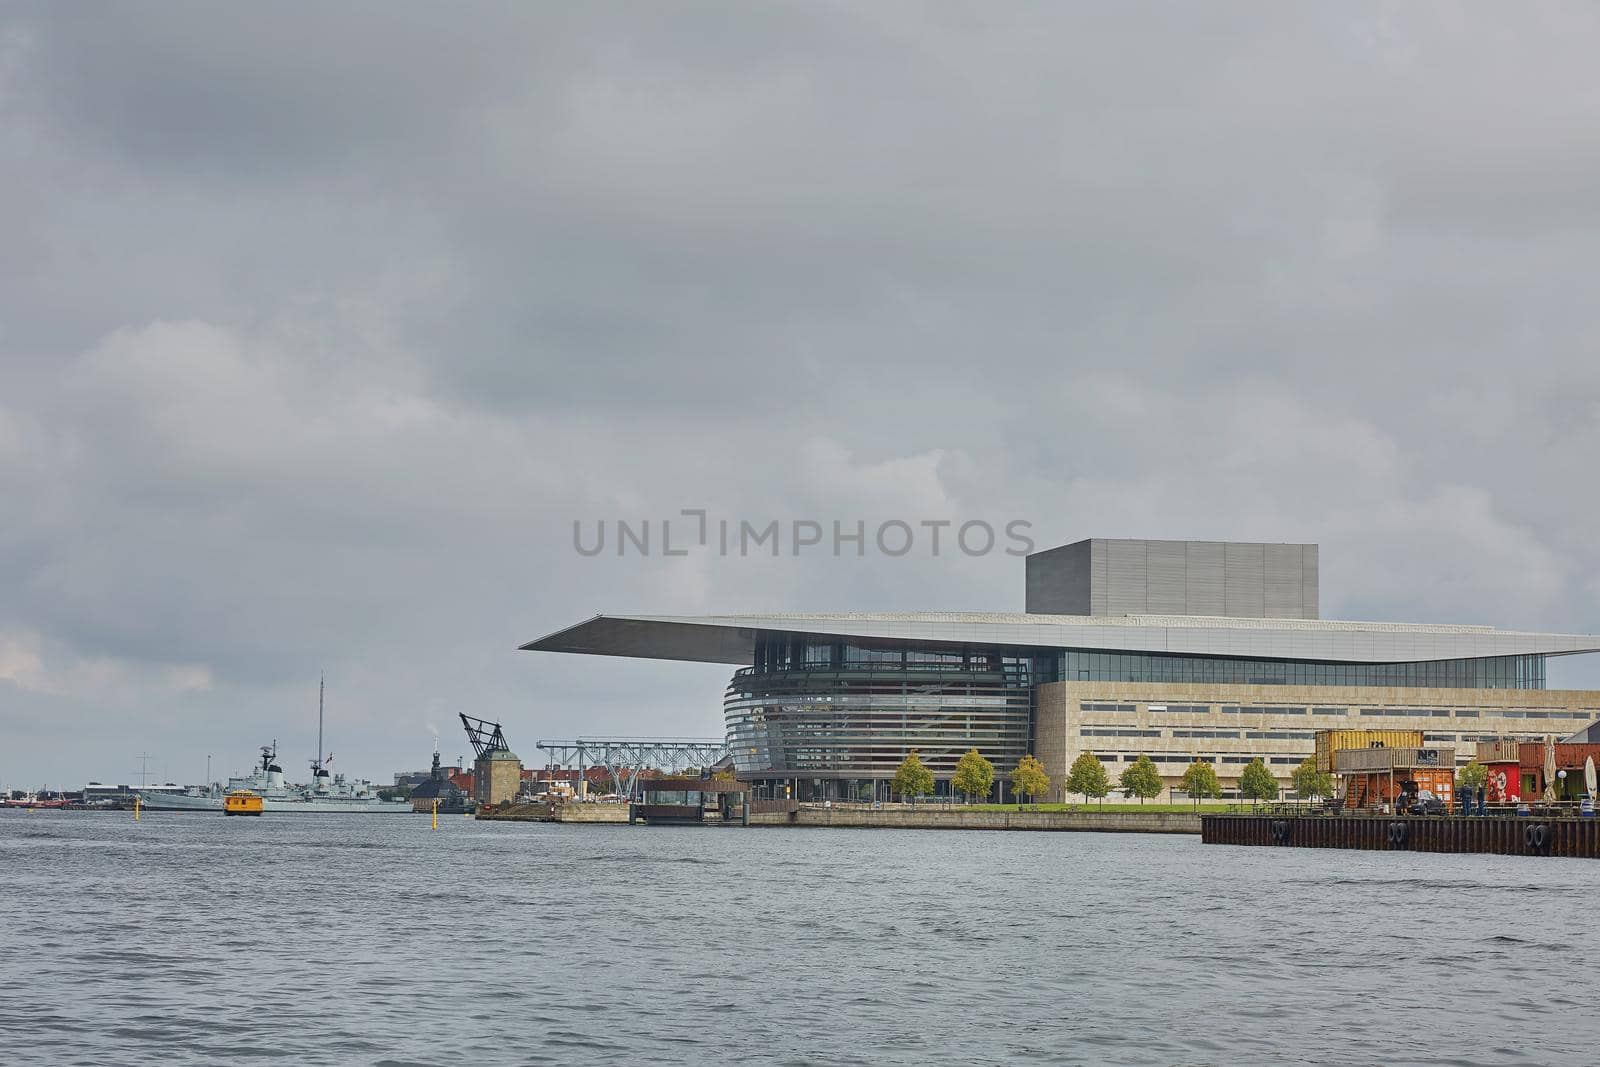 The National Opera House "Operaen" located on the island of Holmen in central Copenhagen. One of the most expensive opera houses ever built by wondry